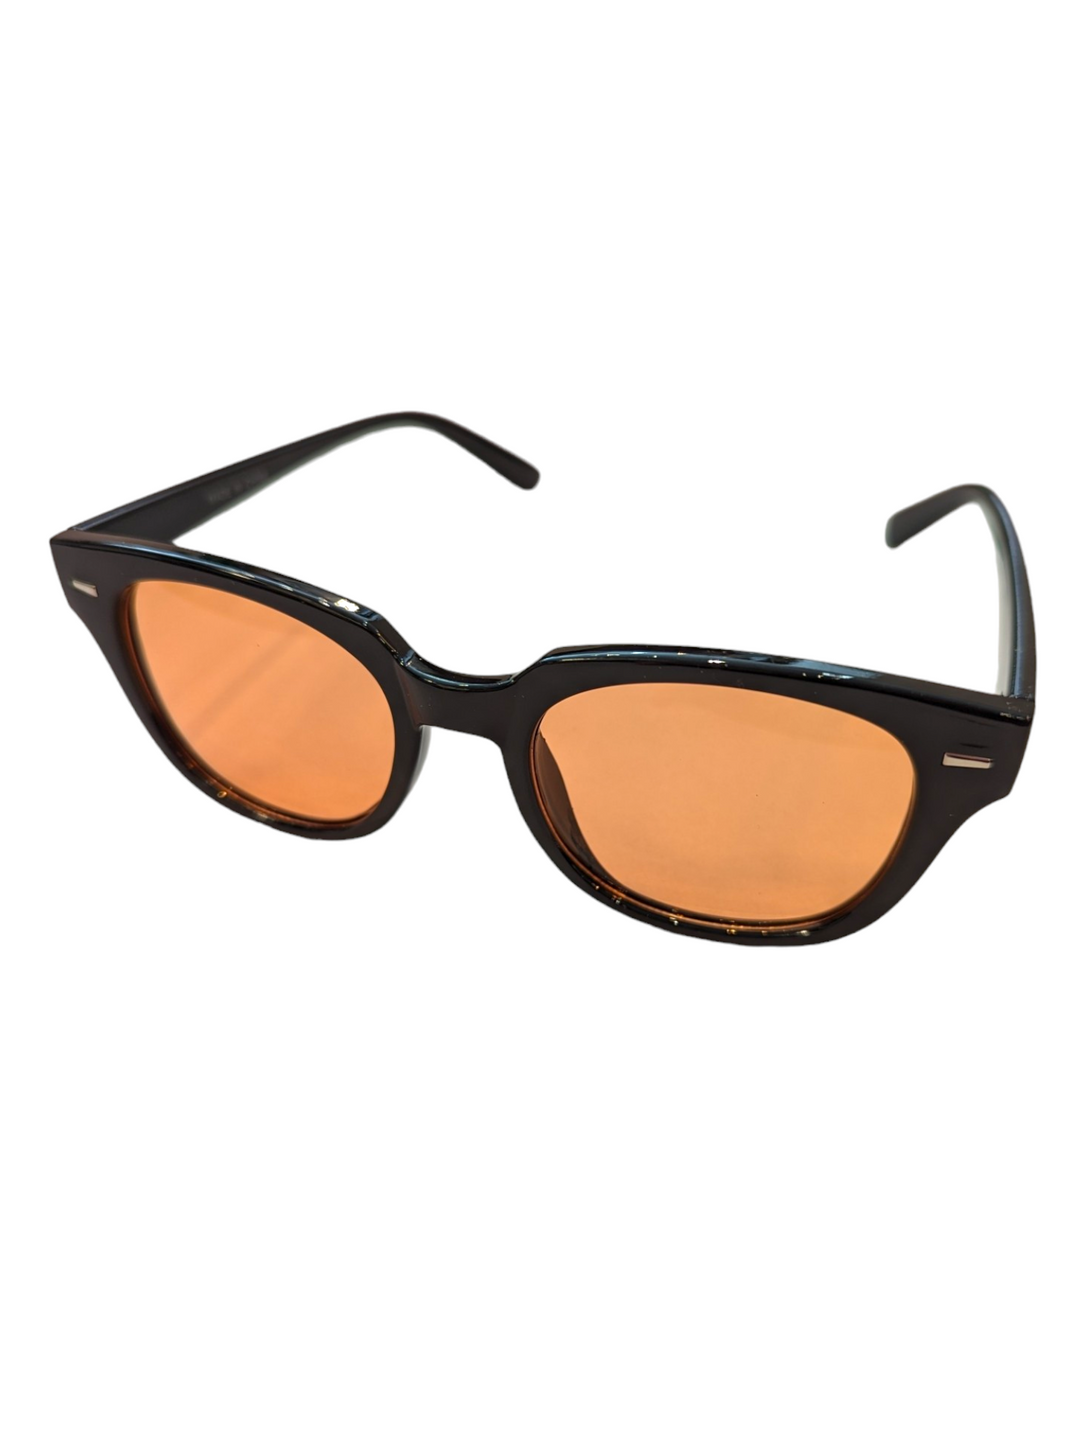 the perfect vacation sunglasses with black frames and peach lenses